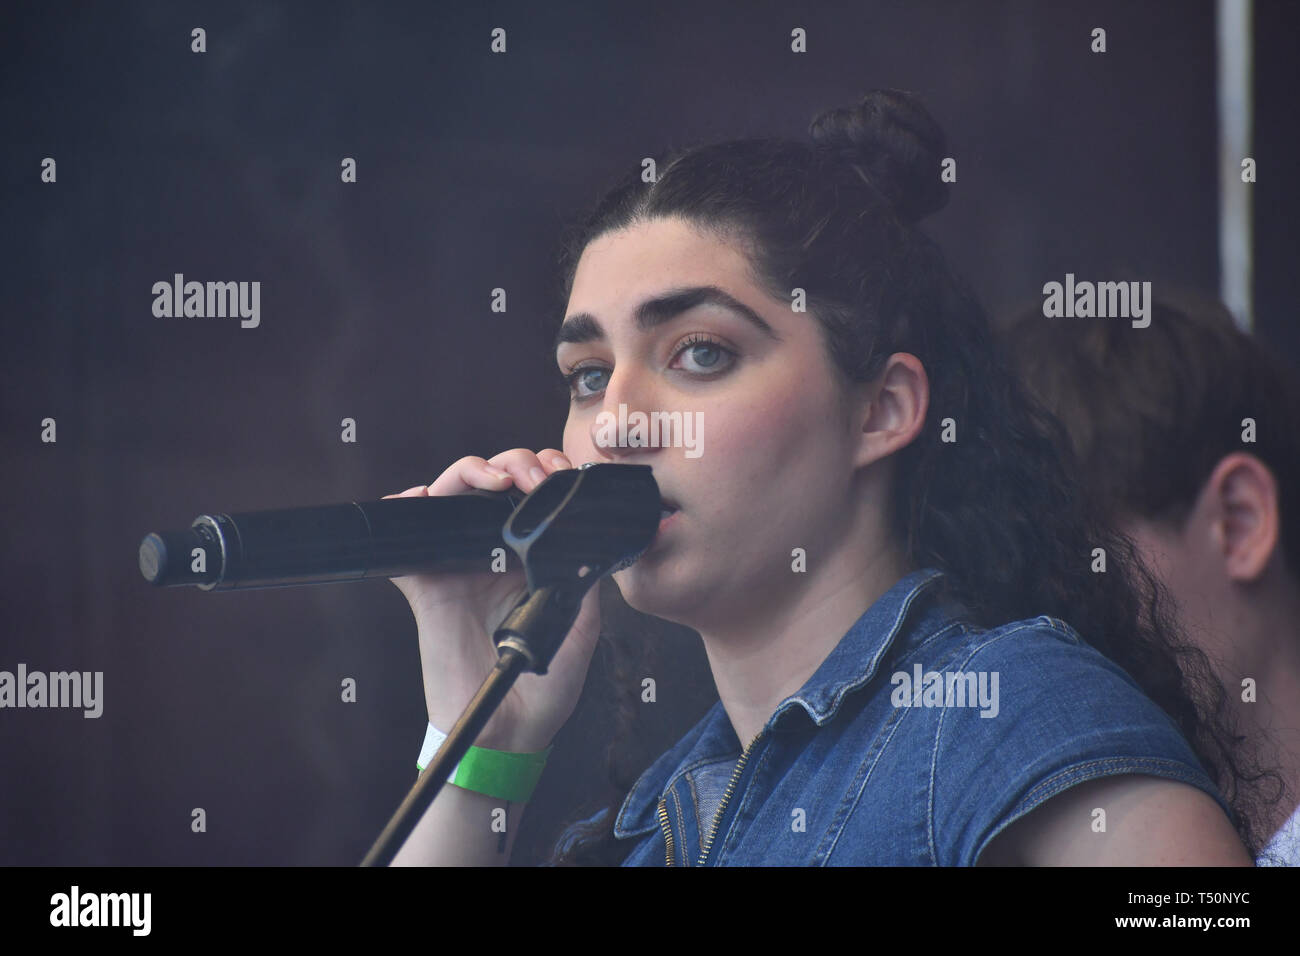 London, UK. 20th April, 2019.Signal - House Band performs at the Feast of St George to celebrate English culture with music and English food stalls in Trafalgar Square on 20 April 2019, London, UK. Credit: Picture Capital/Alamy Live News Stock Photo